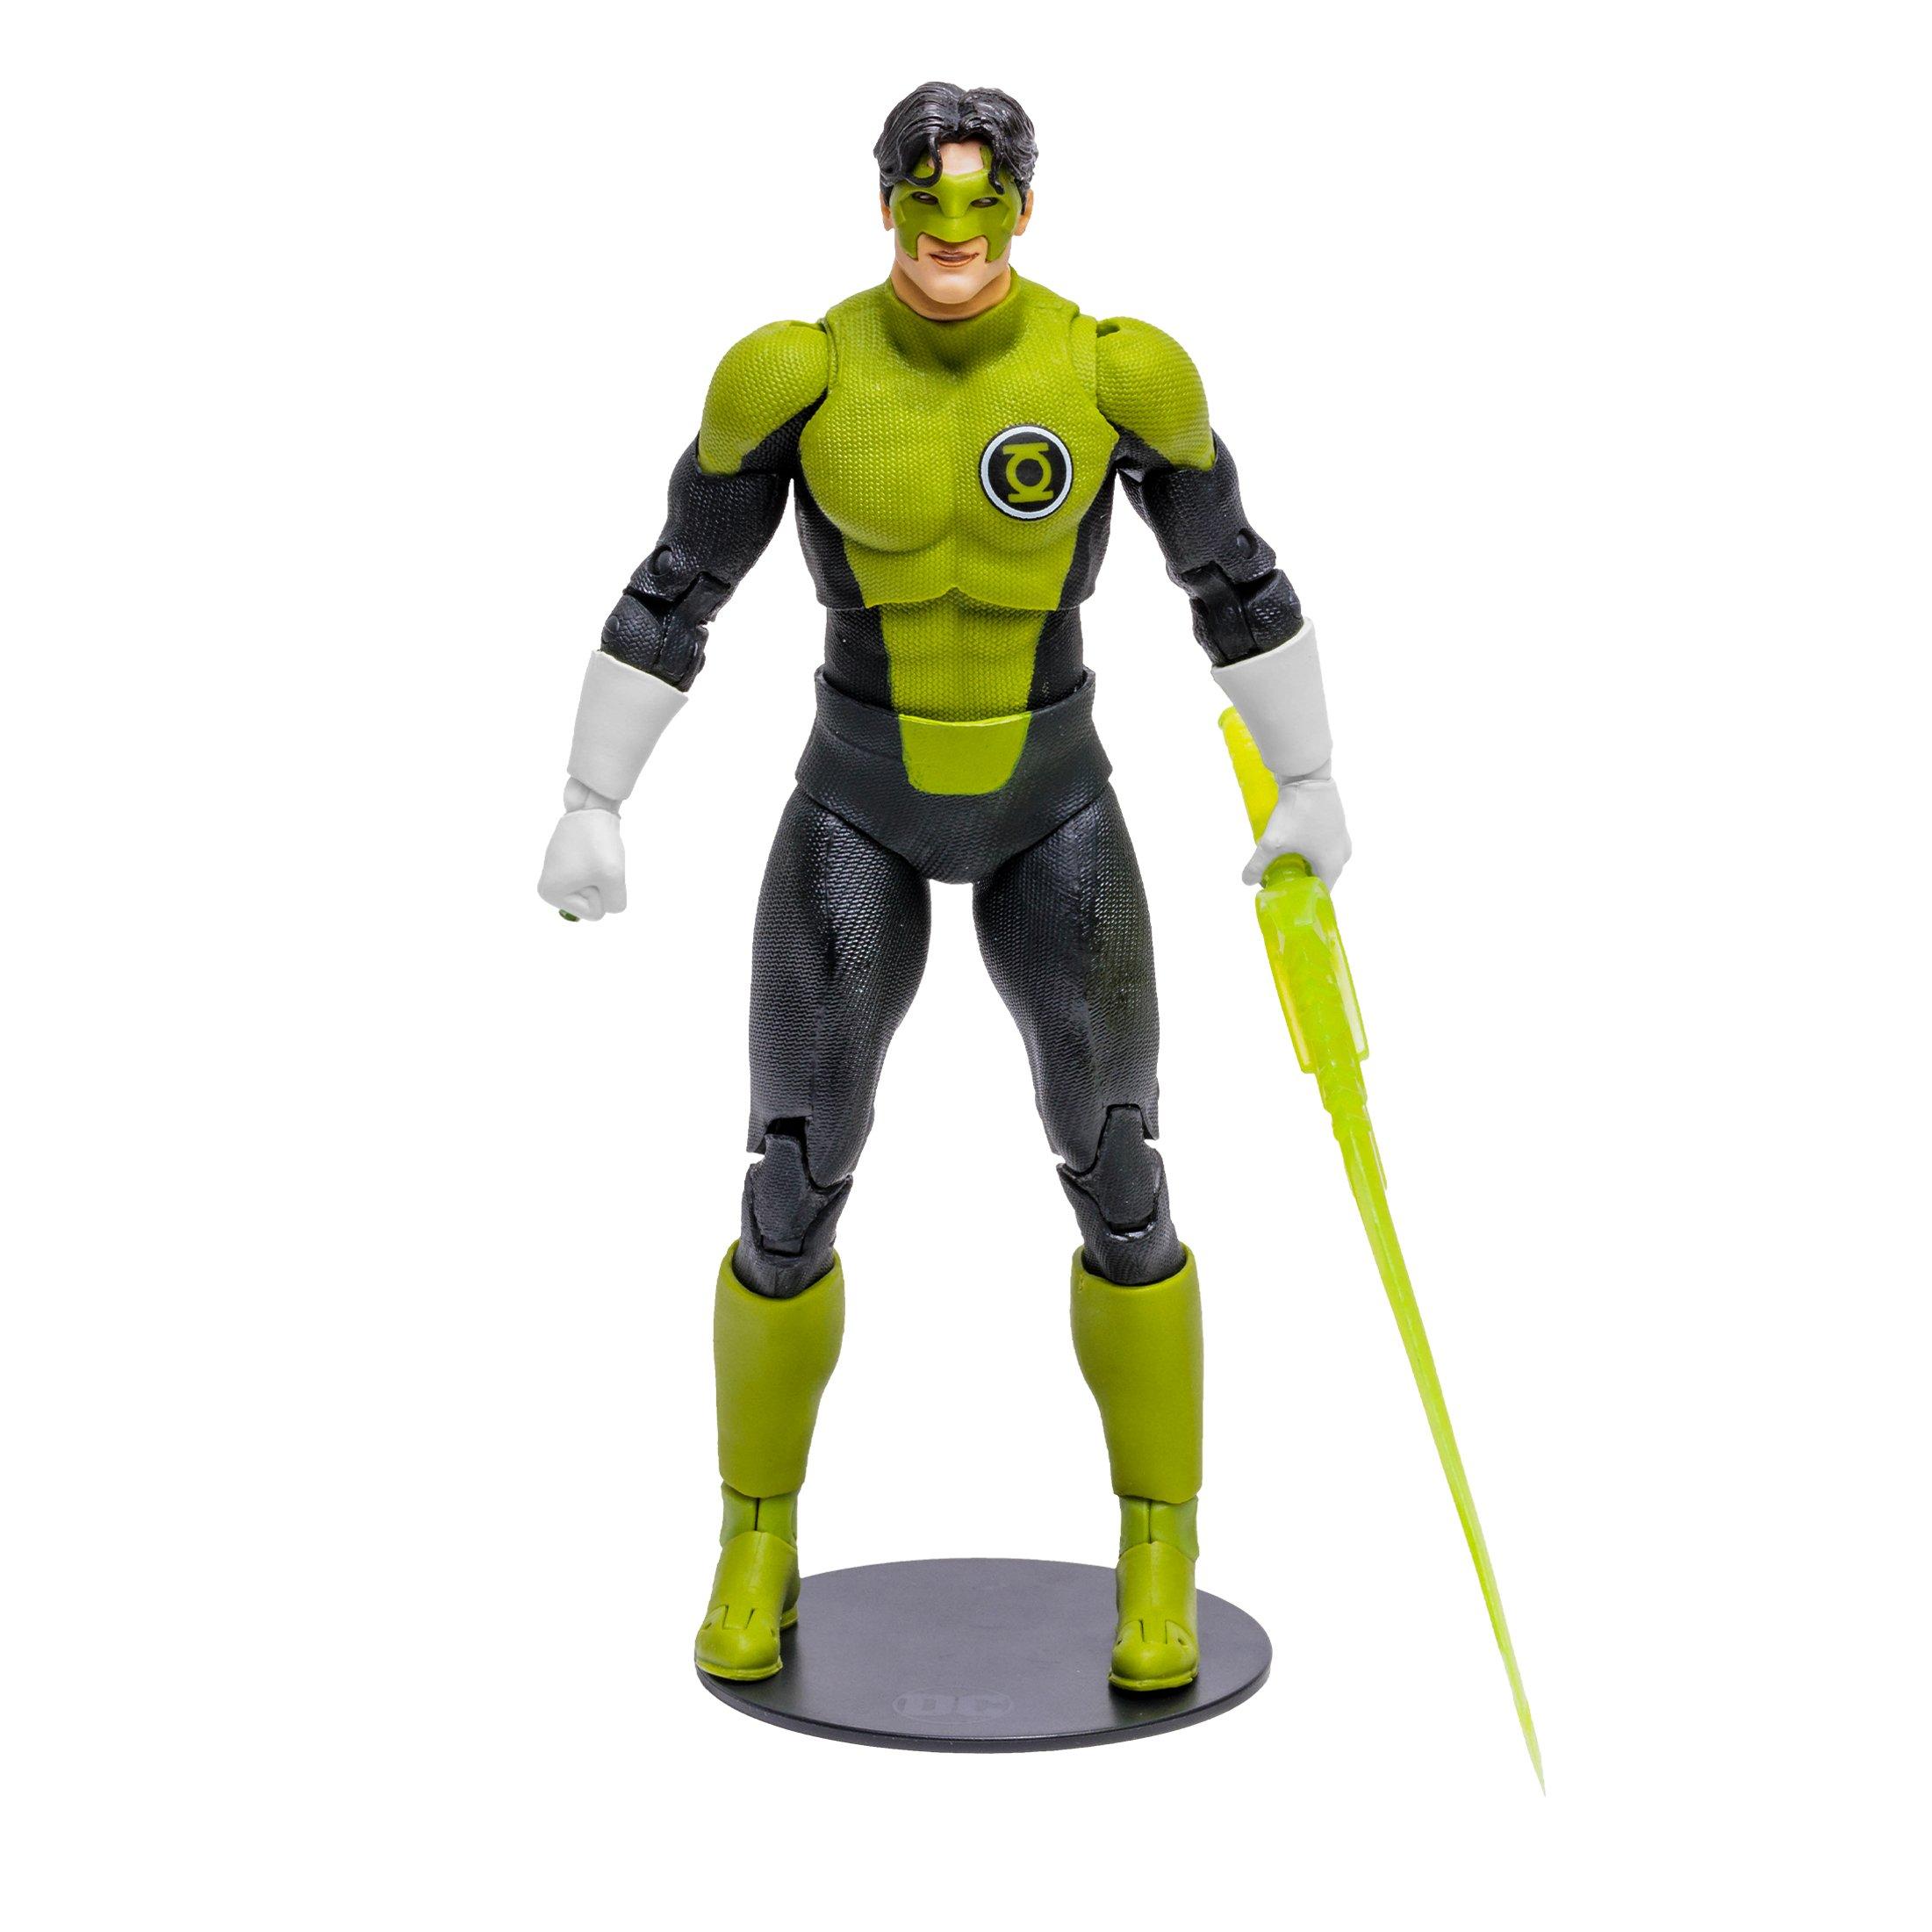 McFarlane Toys DC Multiverse Blackest Night Green Lantern Kyle Rayner Collect to Build 7-in Action Figure (GameStop)